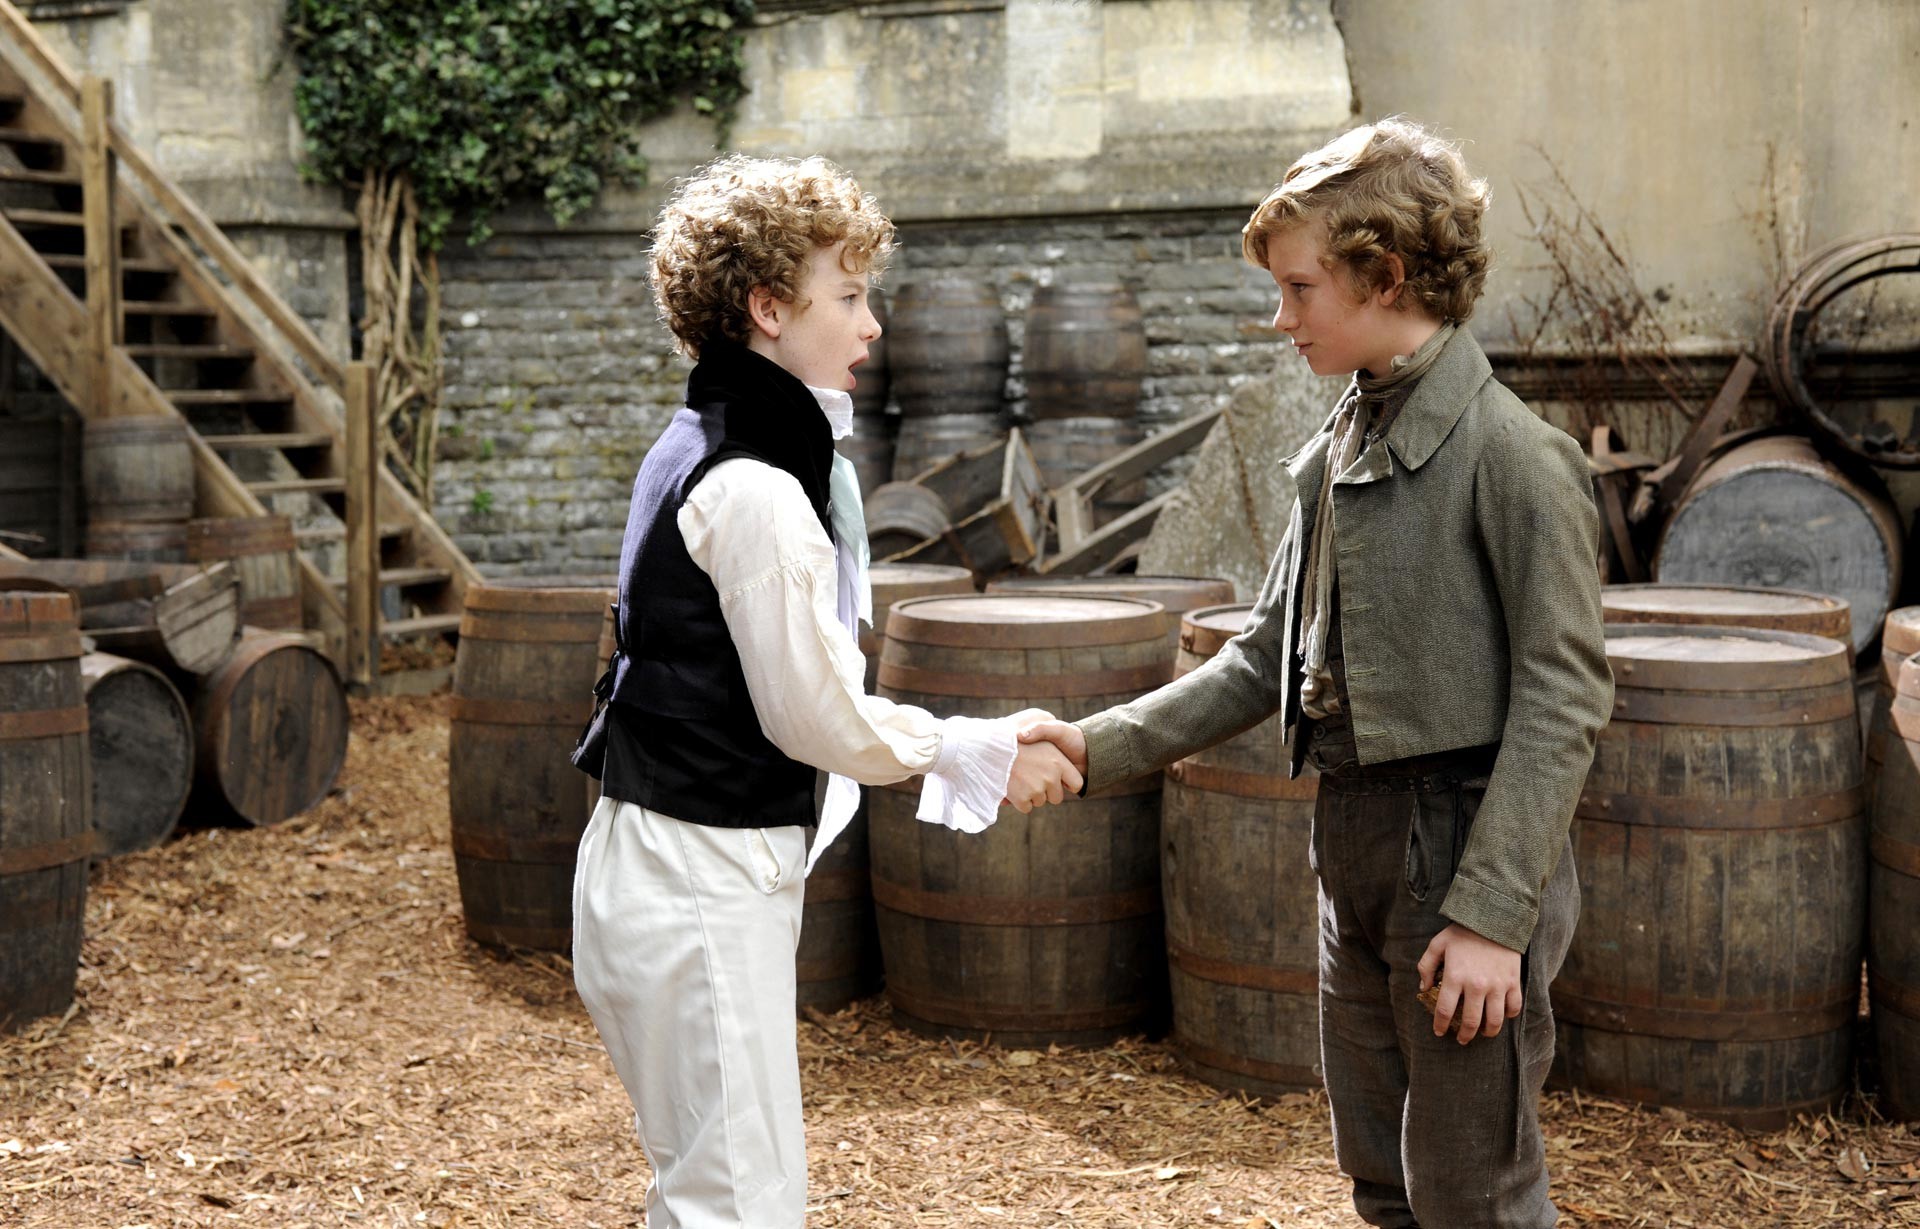 Charlie Callaghan stars as Young Herbert Pocket and Toby Irvine stars as Young Pip in Main Street Films' Great Expectations (2013)